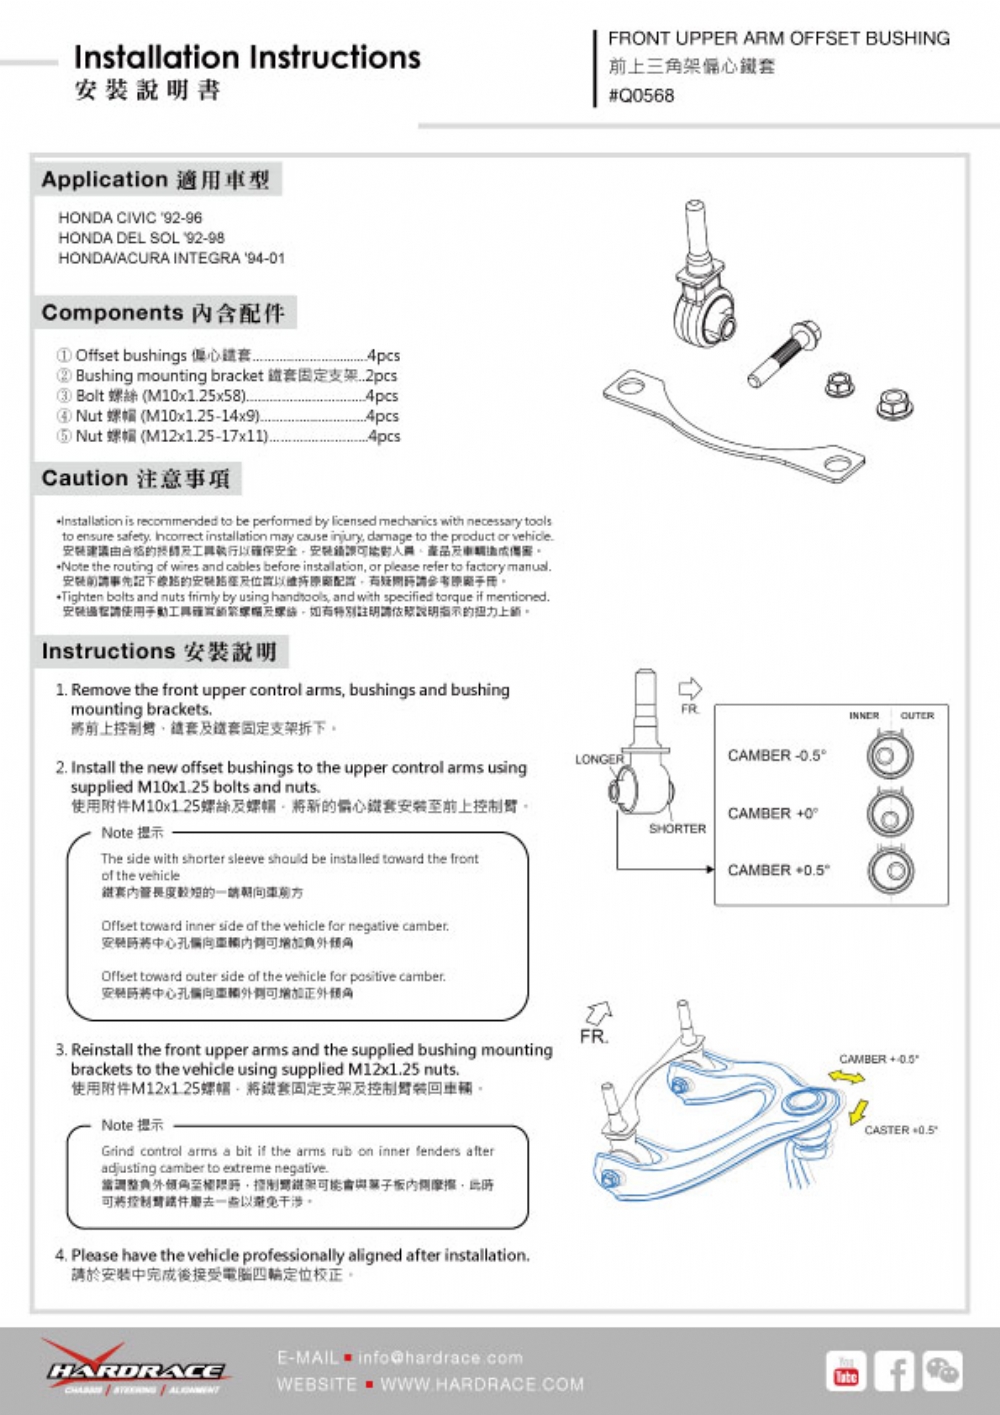 Q0568 - FRONT UPPER ARM BUSHING-OFFSET FUNCTION